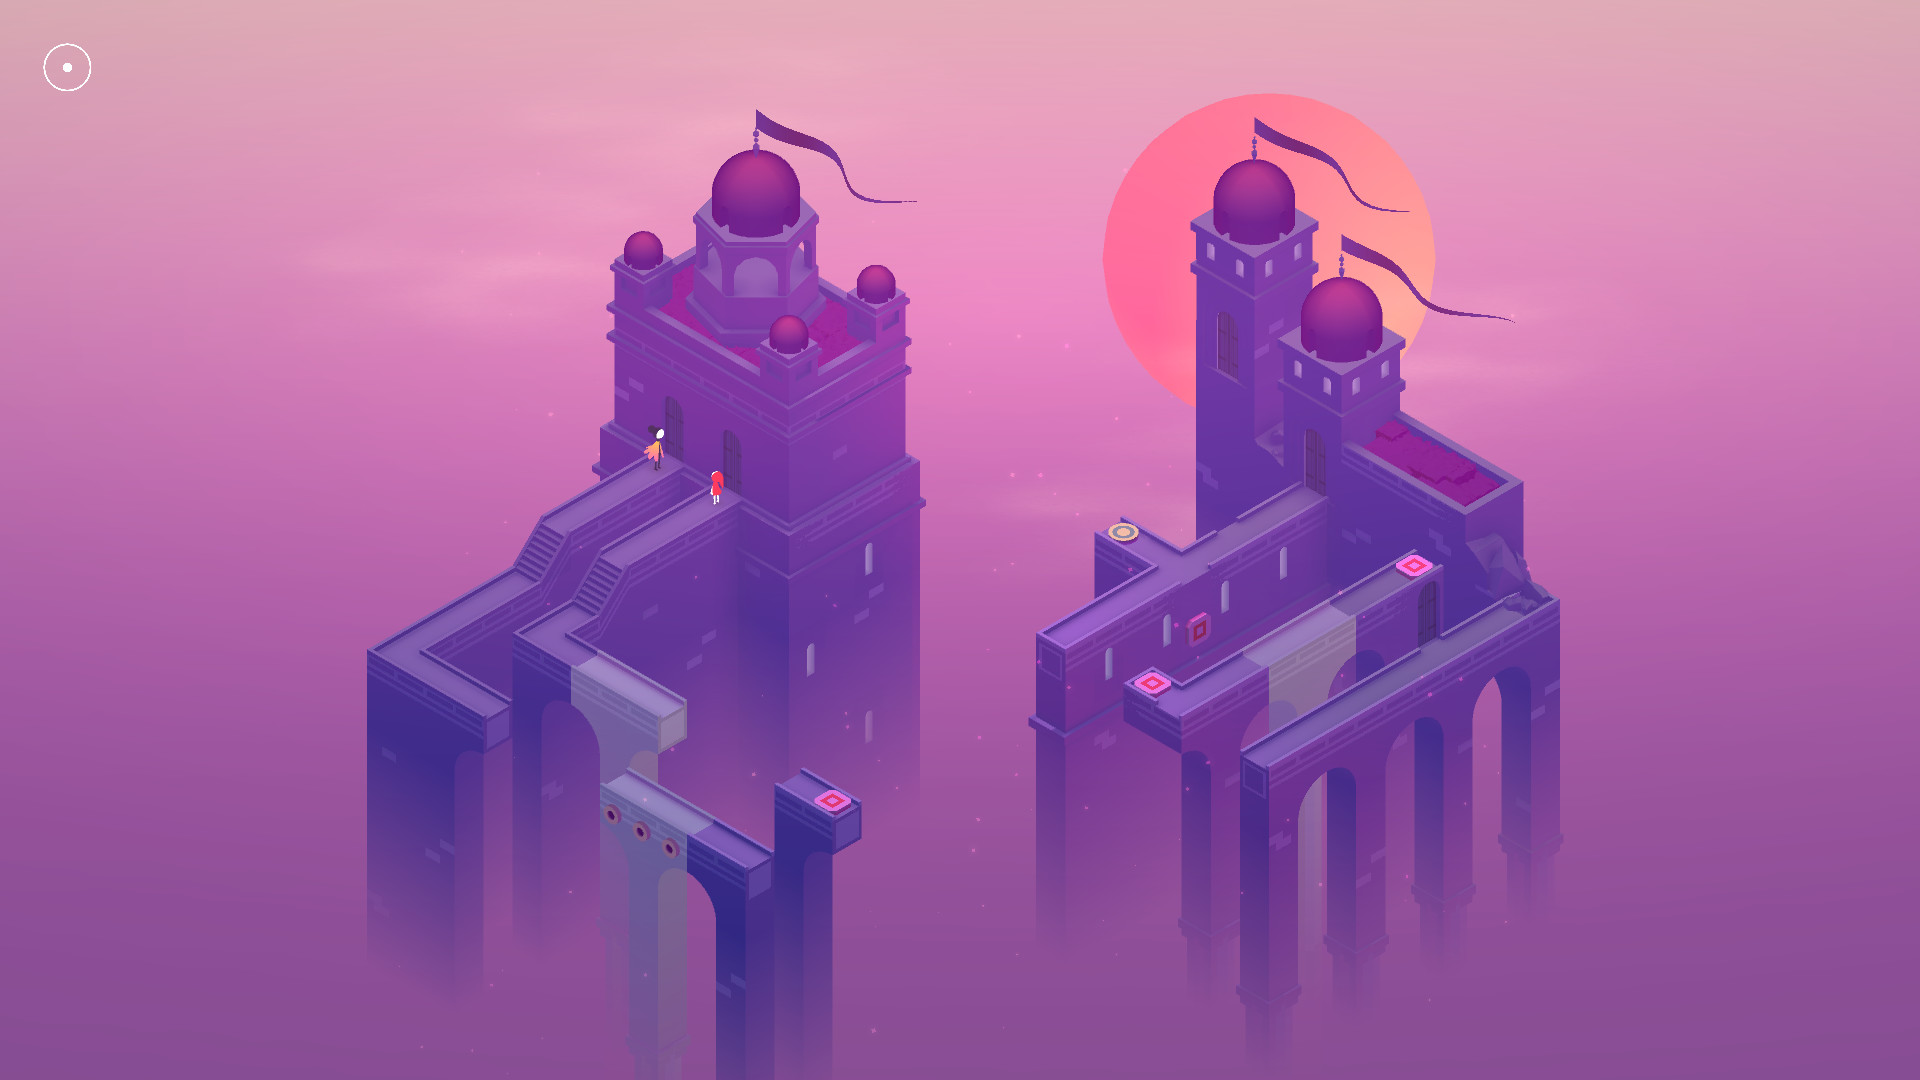 [$ 1.63] Monument Valley 2: Panoramic Edition Steam CD Key